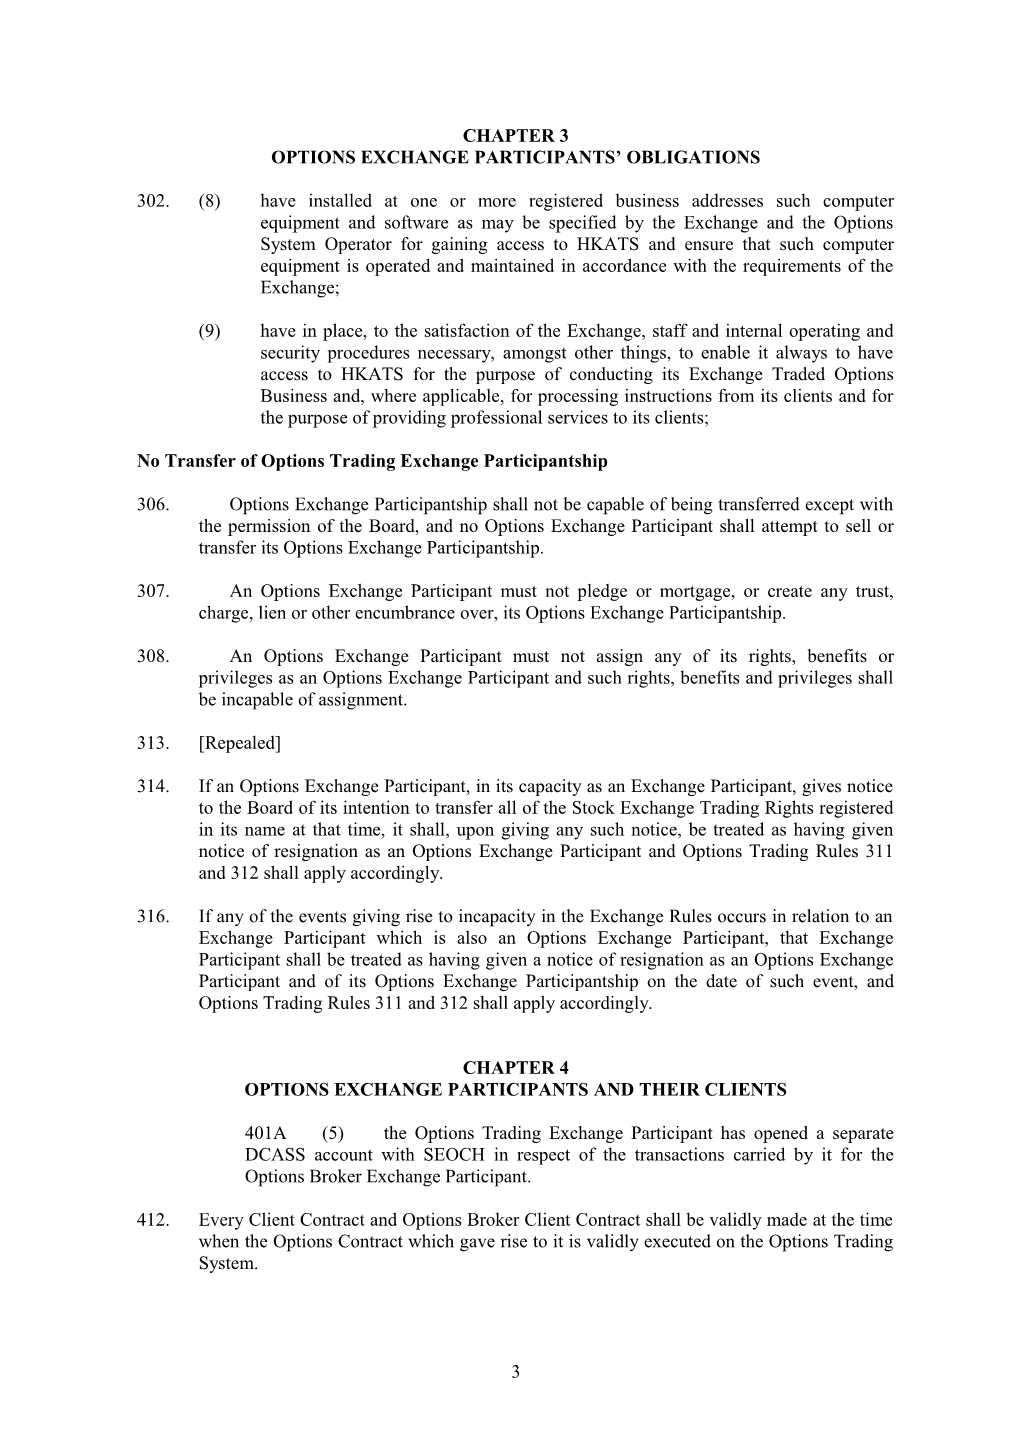 Rule Amendments to the Options Trading Rules Relating to DCASS